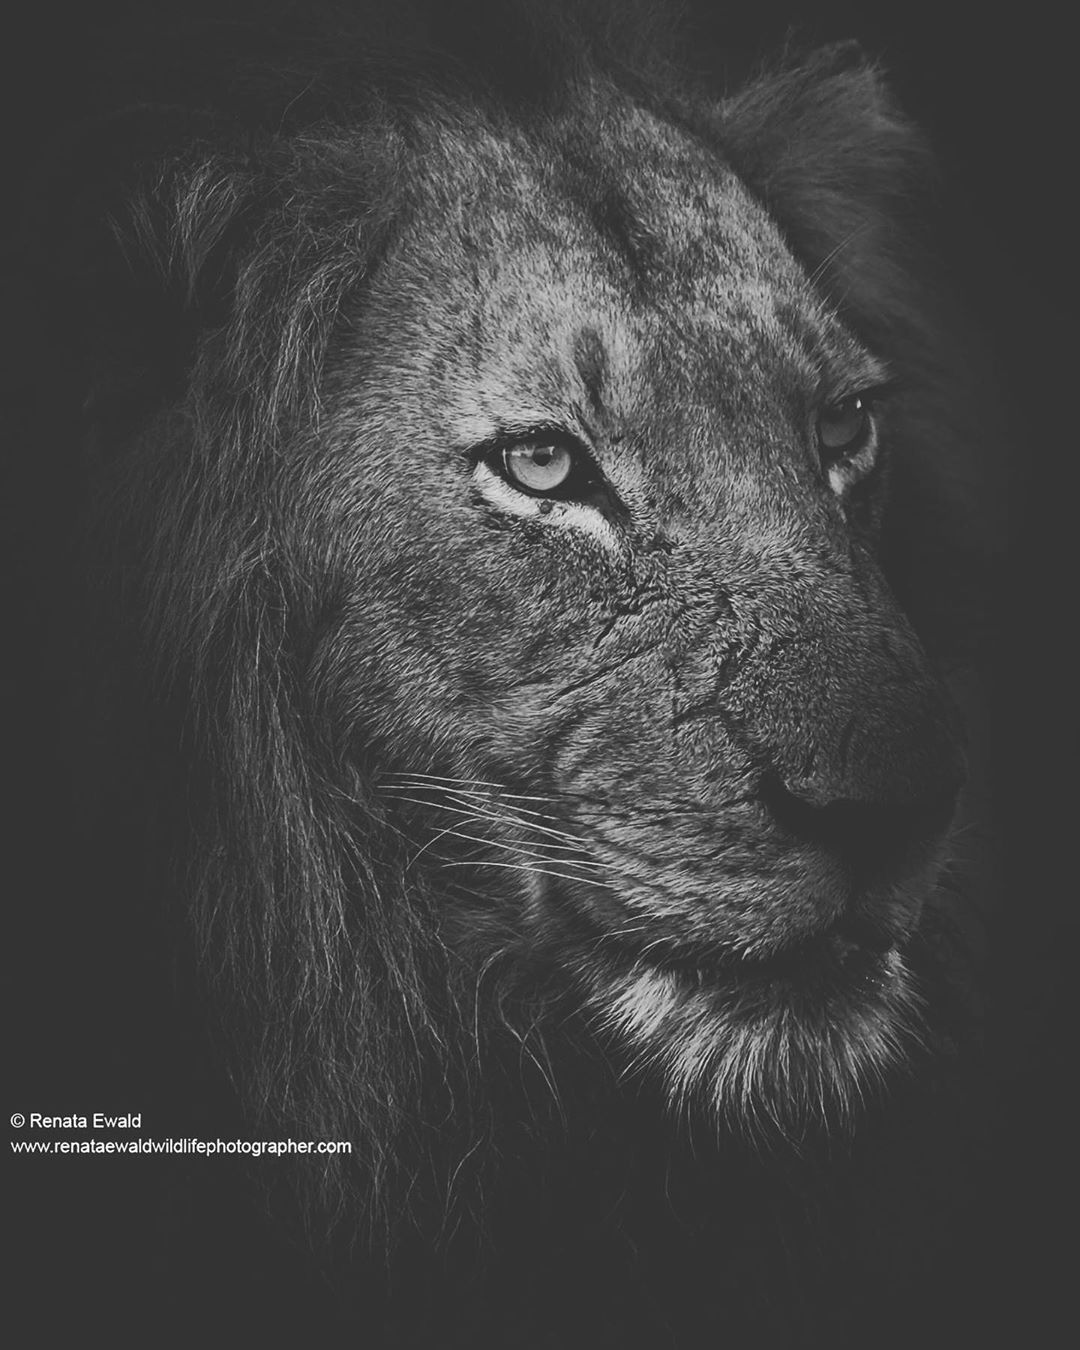 <p>The real king #lion #big5 #wildlife #monochromemonday #monochromephotography #bigcat #wildlifephotography #wildgeography #wildlifelovers #wild #wildlifeplanet #nature #naturephotography  #natgeowild #nationalgeographic #africageophoto #africageographic #wildanimals #wildography #wildographydudette #wildshots #safariphoto #photooftheday #wildlife_perfection #canon <br/>
<a href="https://www.instagram.com/p/CFaPW7SgCsT/?igshid=m7ljibmbhno7">https://www.instagram.com/p/CFaPW7SgCsT/?igshid=m7ljibmbhno7</a></p>